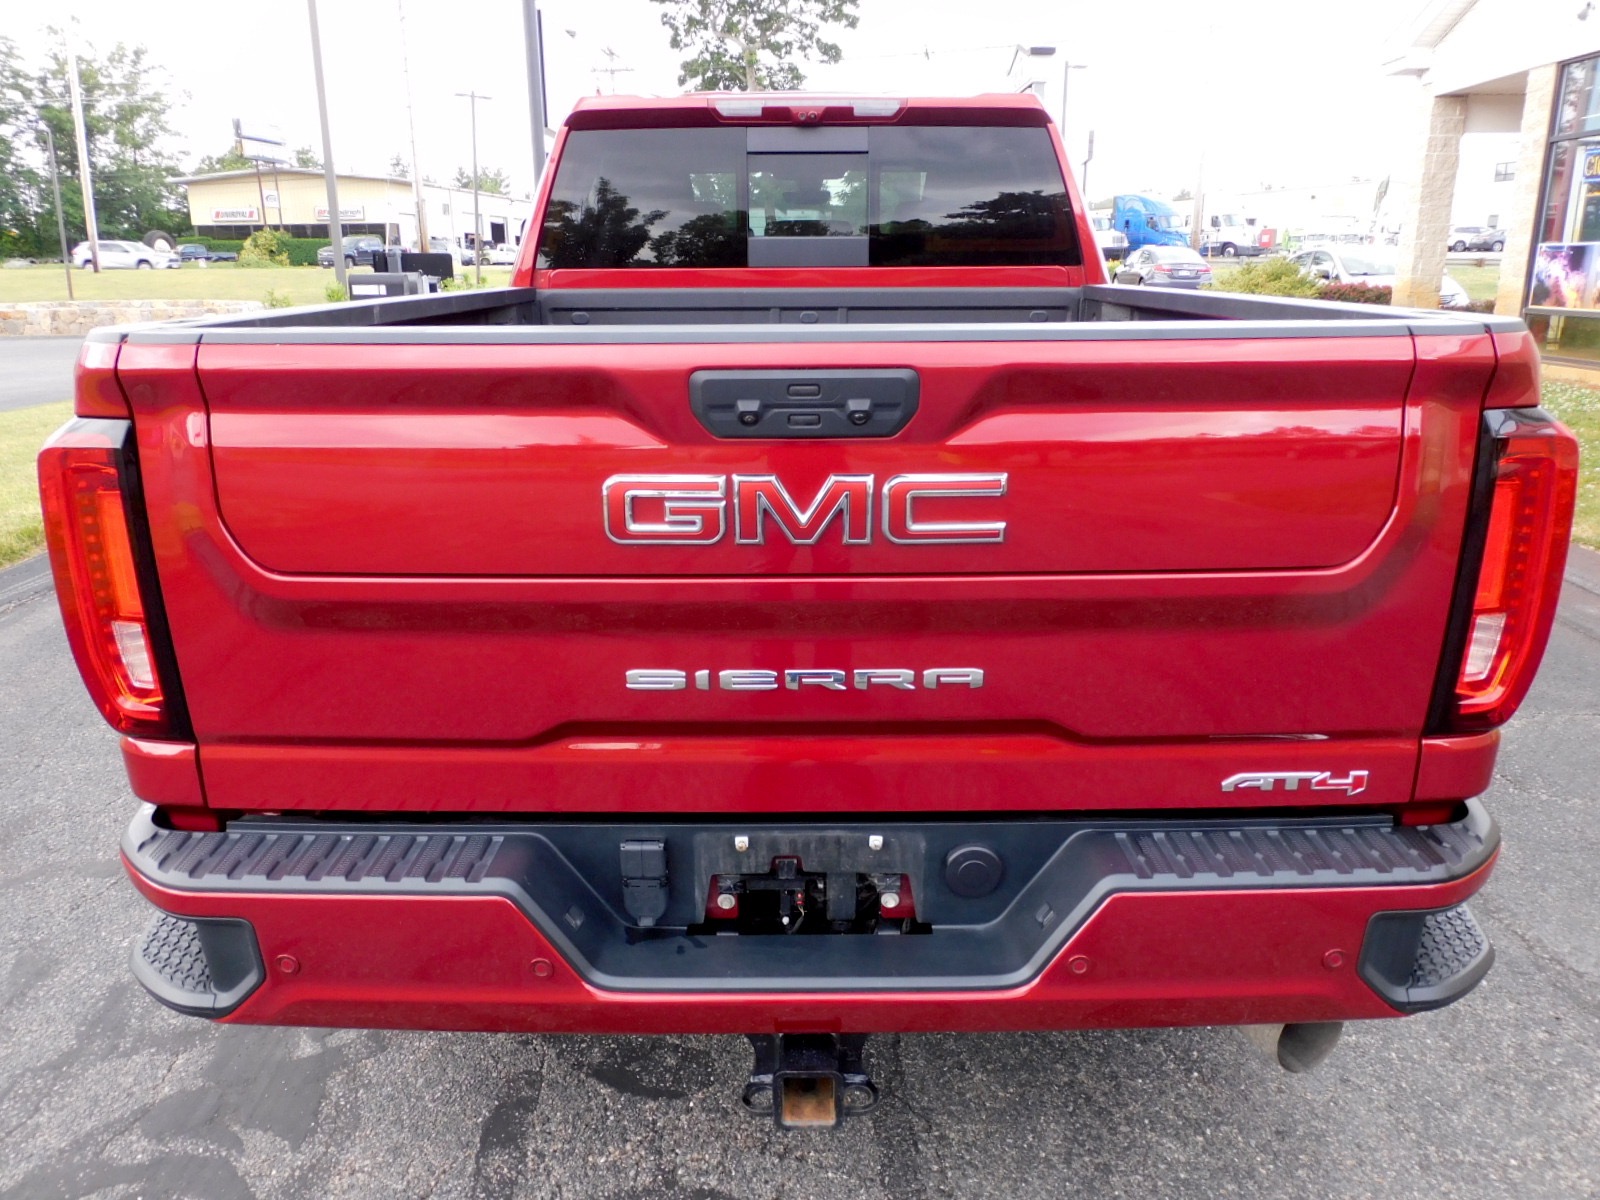 Used 2020 Gmc Sierra 3500hd 4wd Crew Cab At4 For Sale 76800 Metro